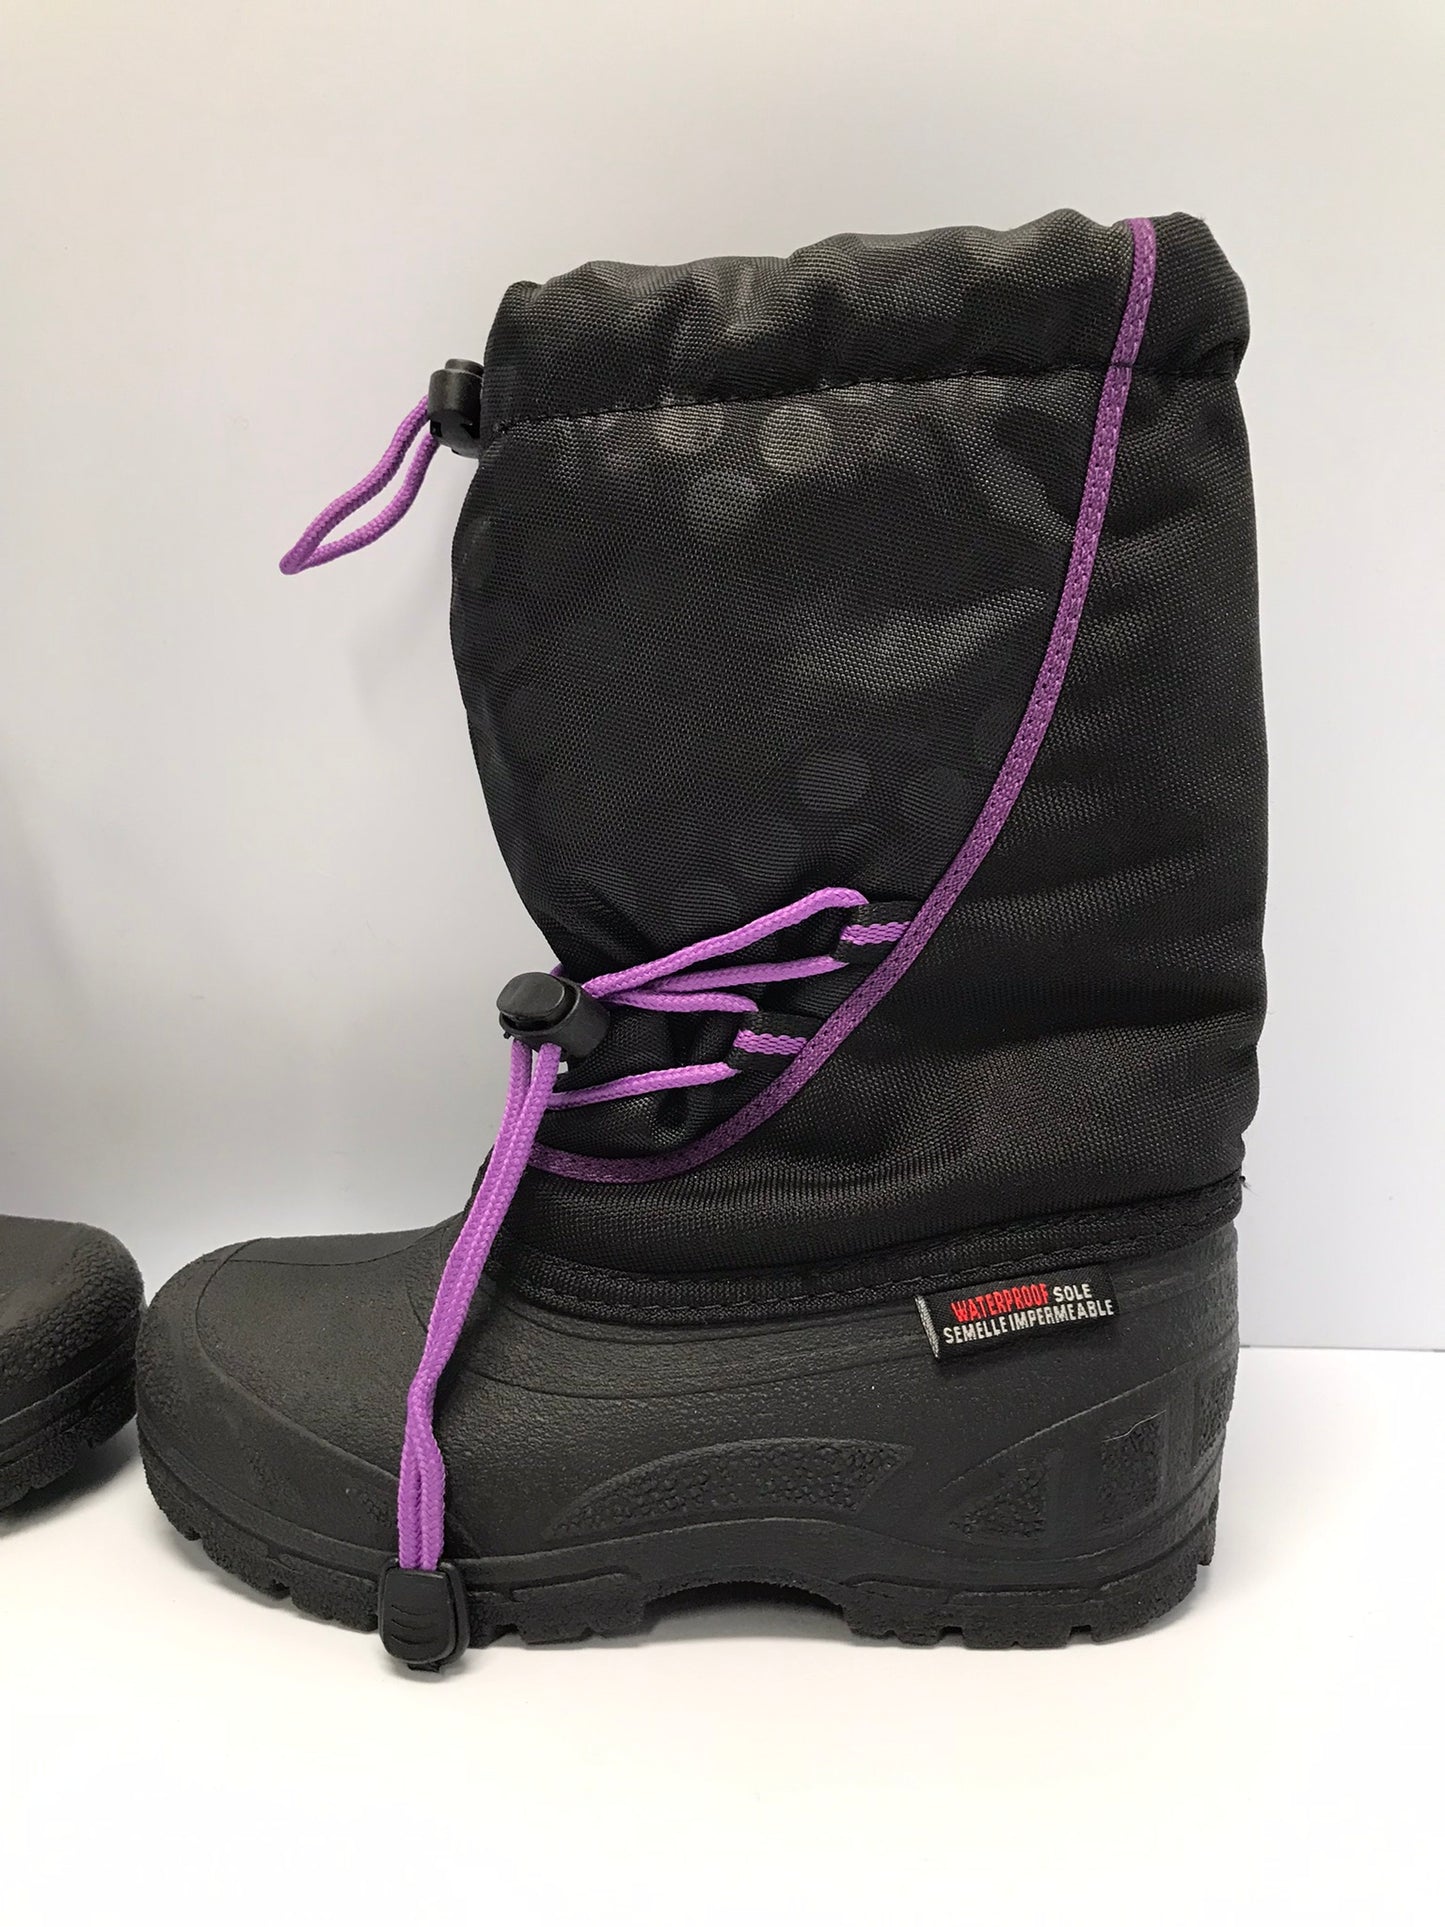 Winter Boots Child Size 13 Canadian Black Purple Waterproof With Liner New Demo Model